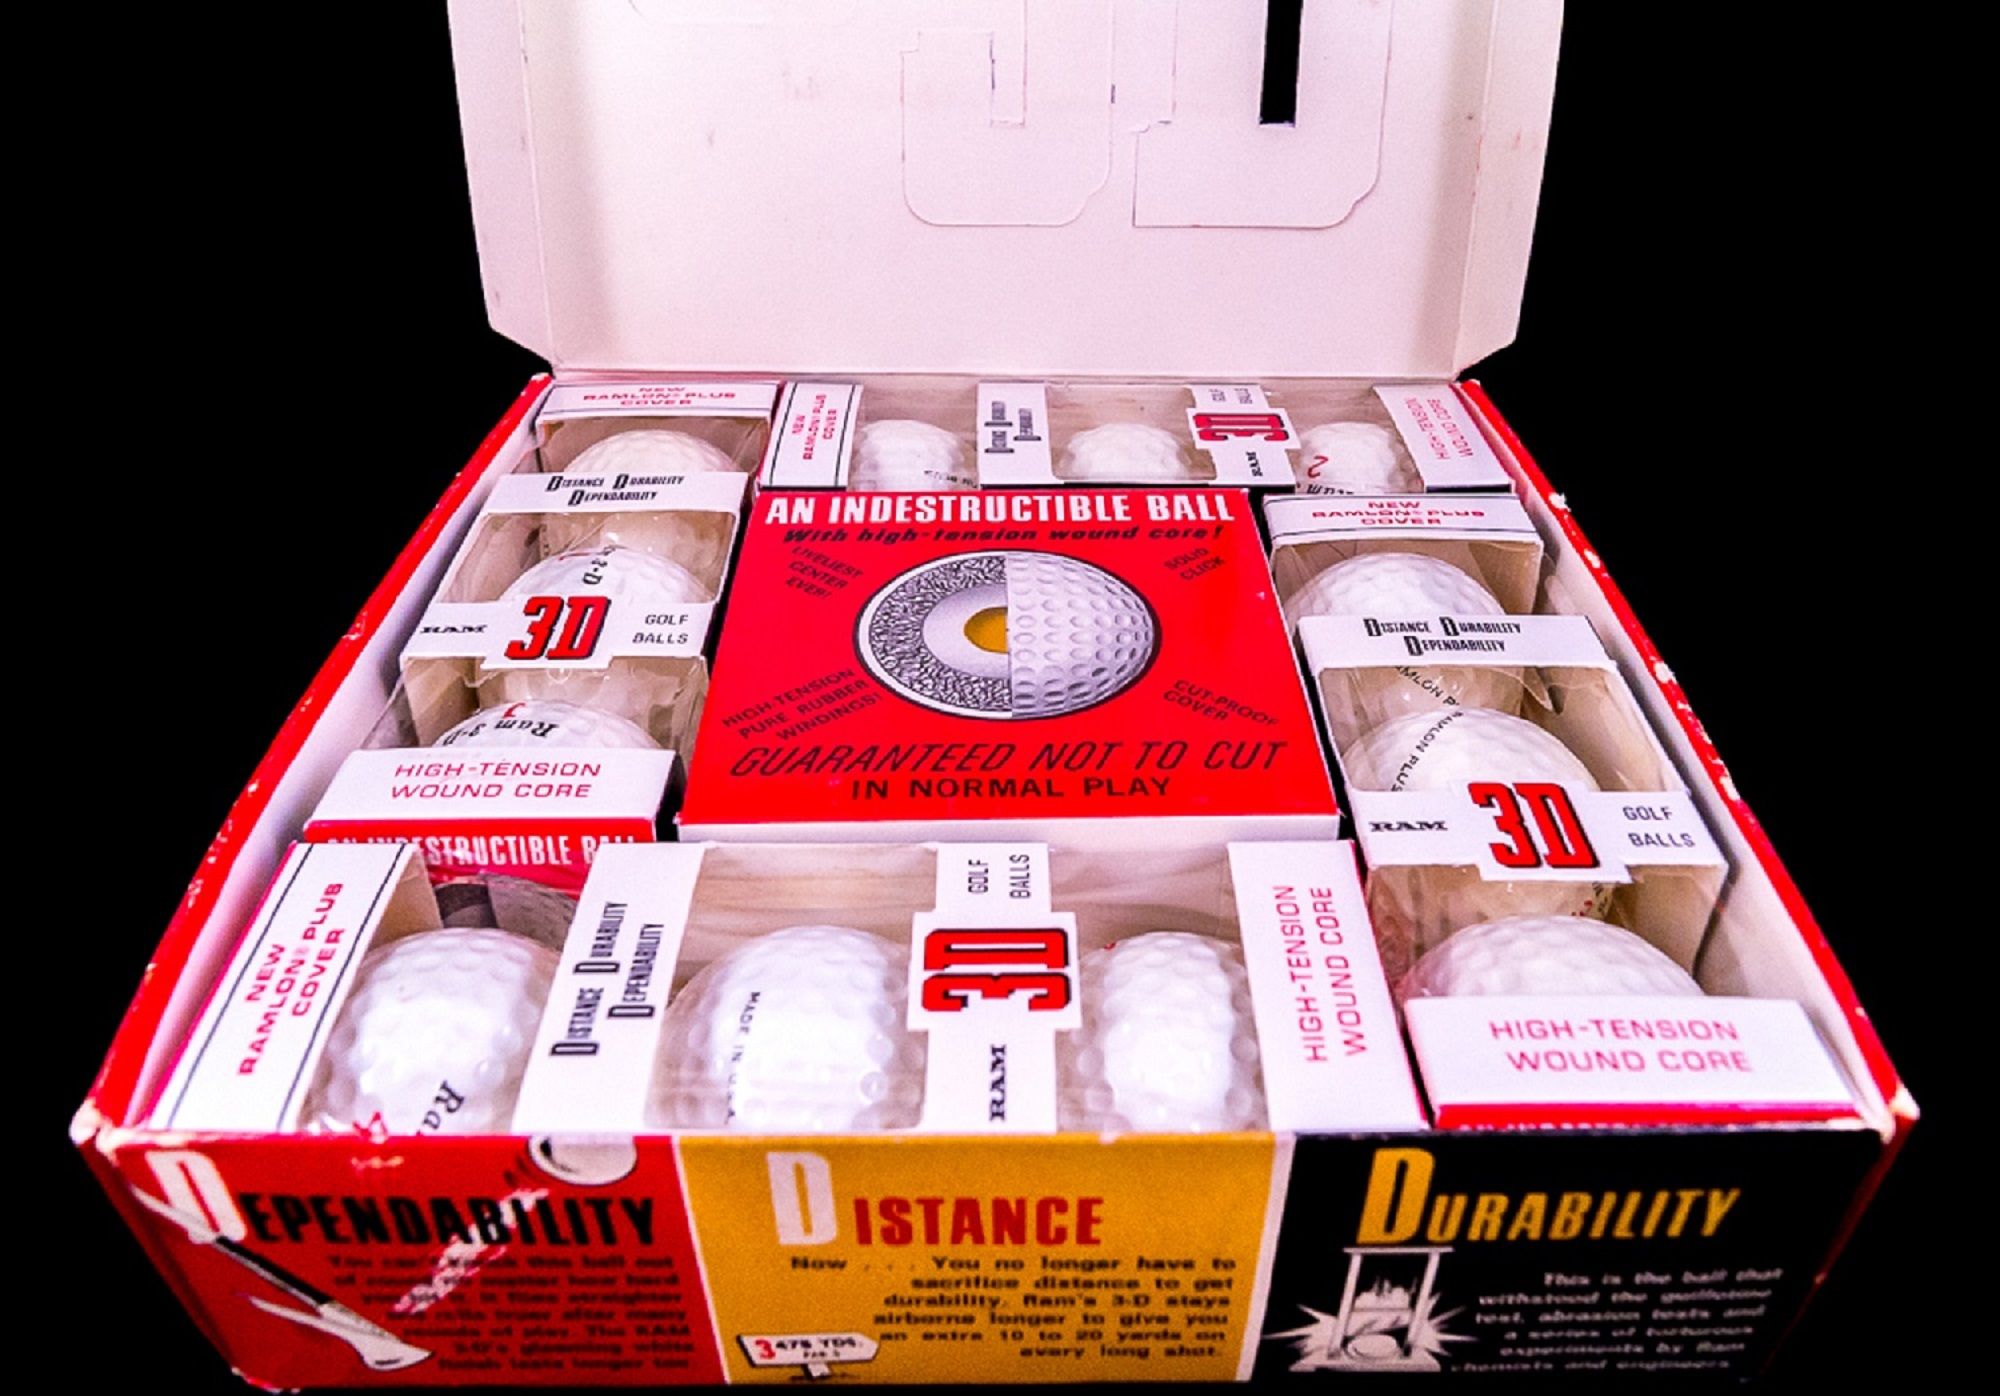 a view of the original packaging for the Ram 3D golf balls